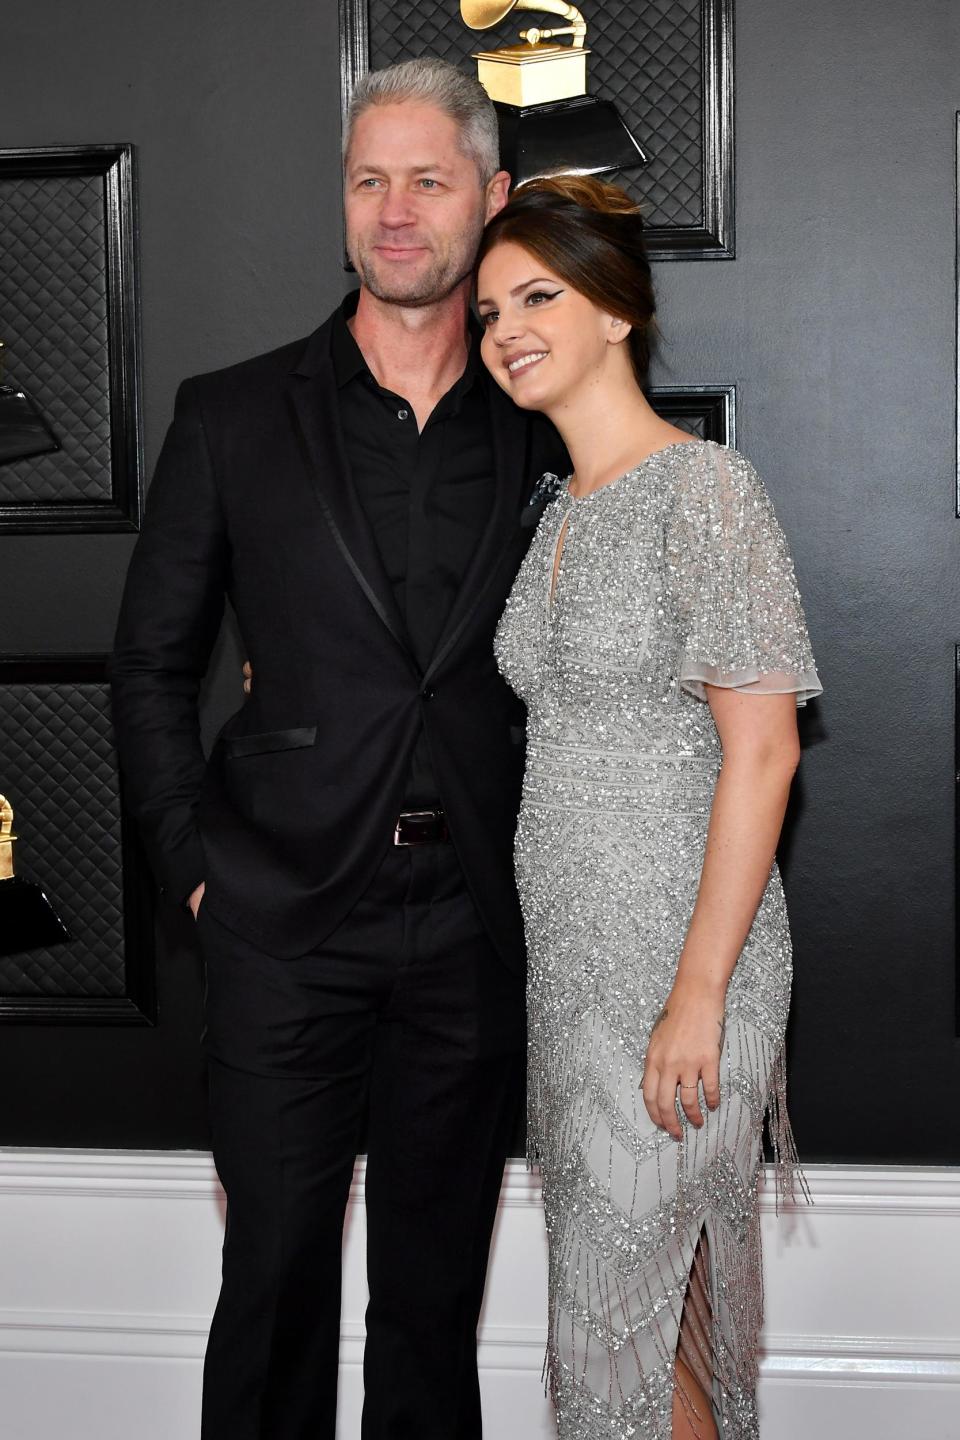 Sean Larkin and Lana Del Rey at the 2020 Grammys (Getty Images)